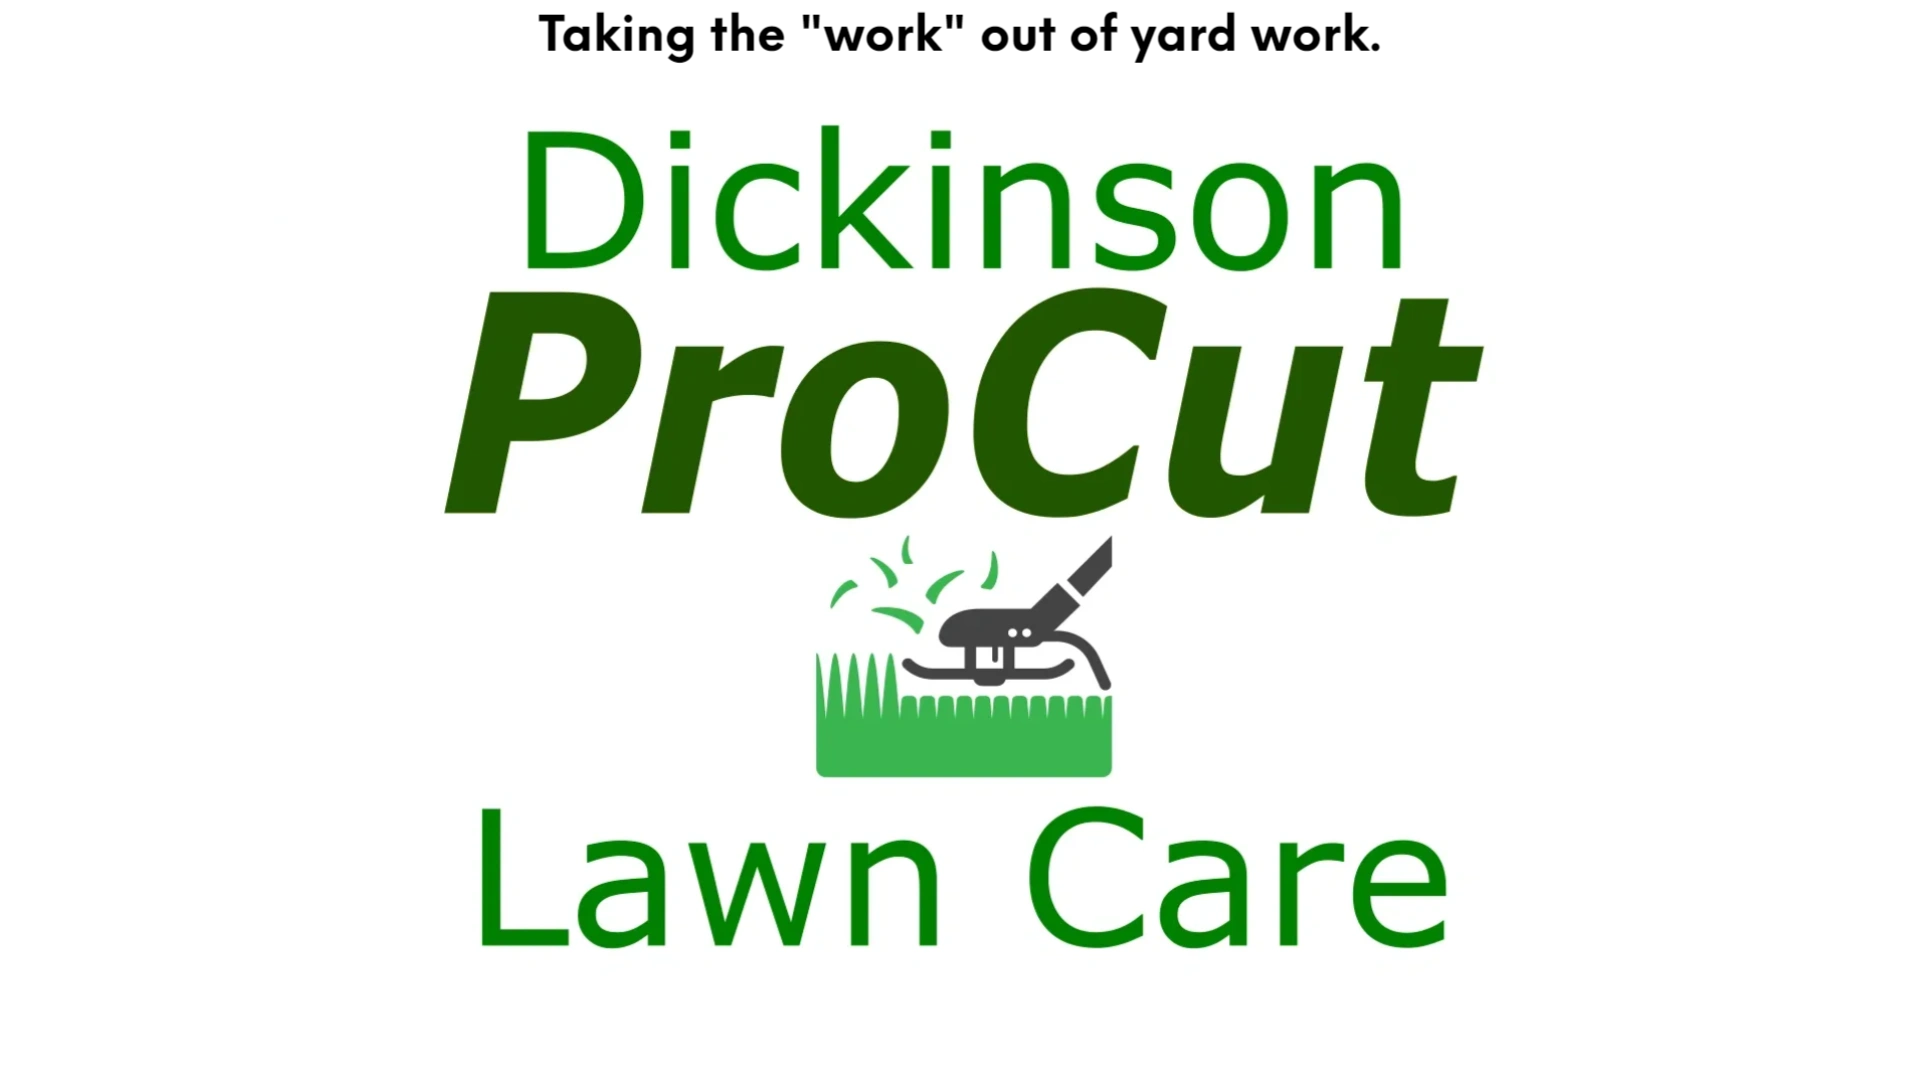 Dickinson Procut with weed eater in image